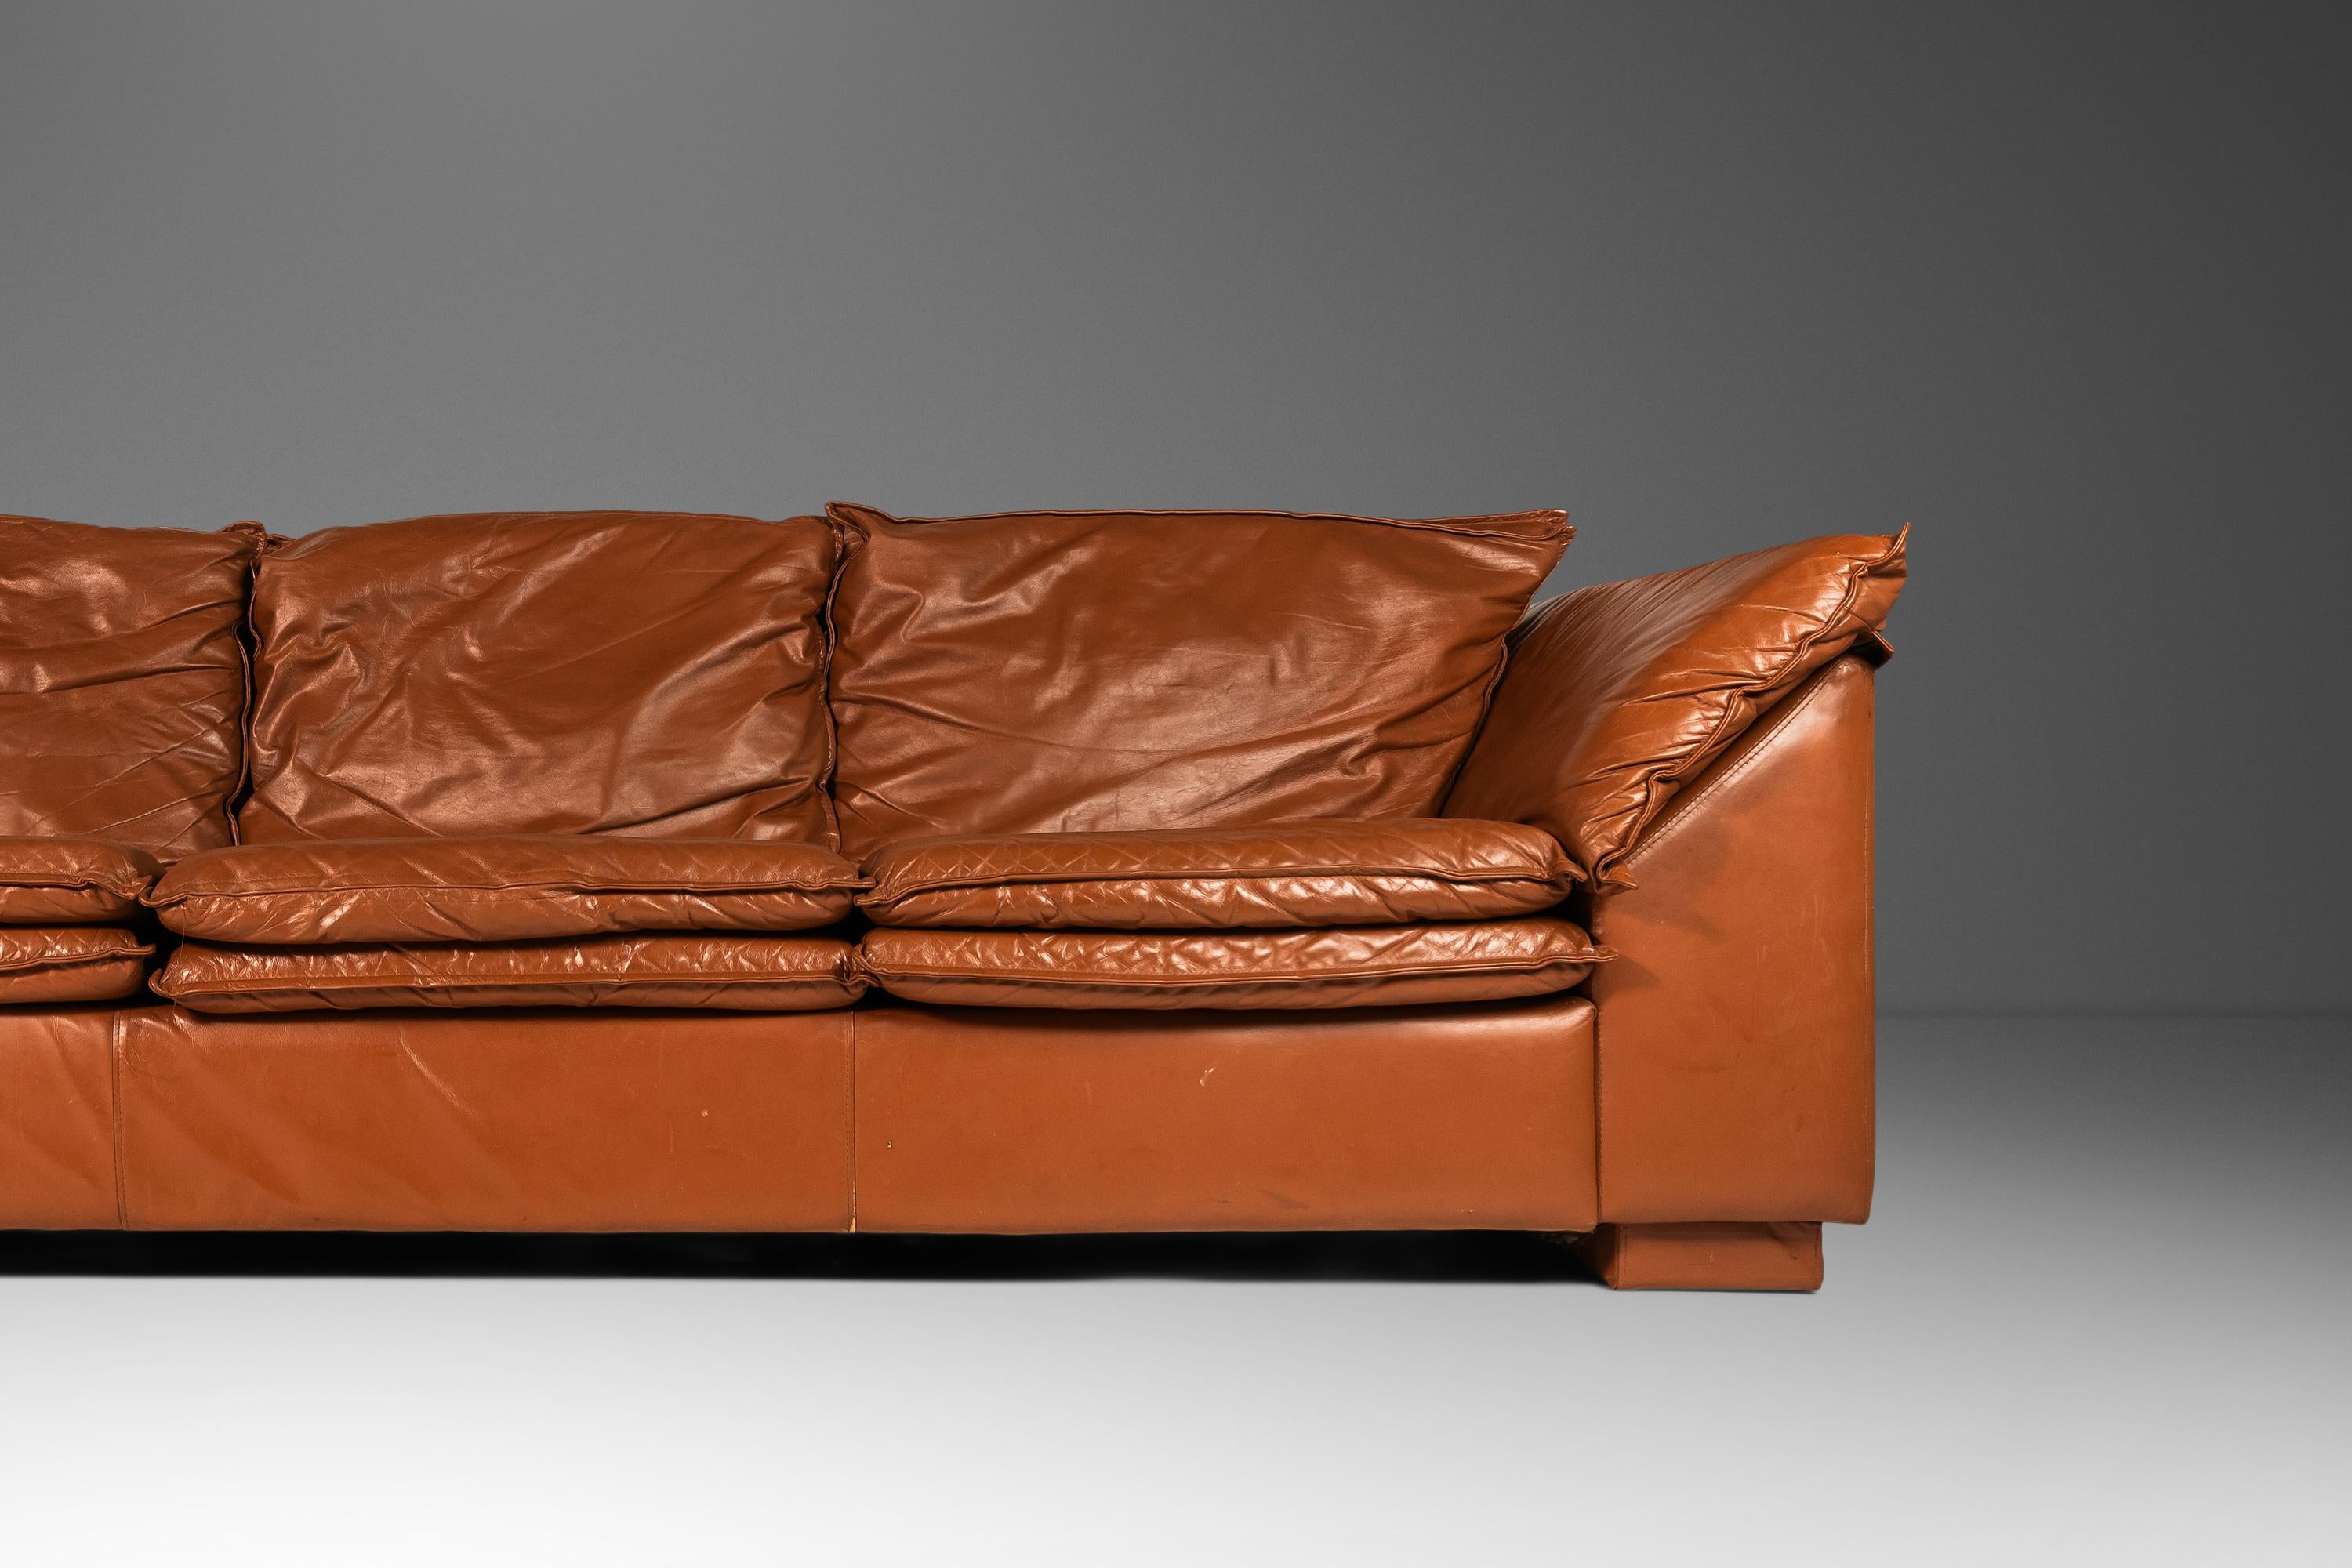 Low Profile Sofa in Cognac Brown Leather in the Manner of Niels Eilersen, 1980's For Sale 7